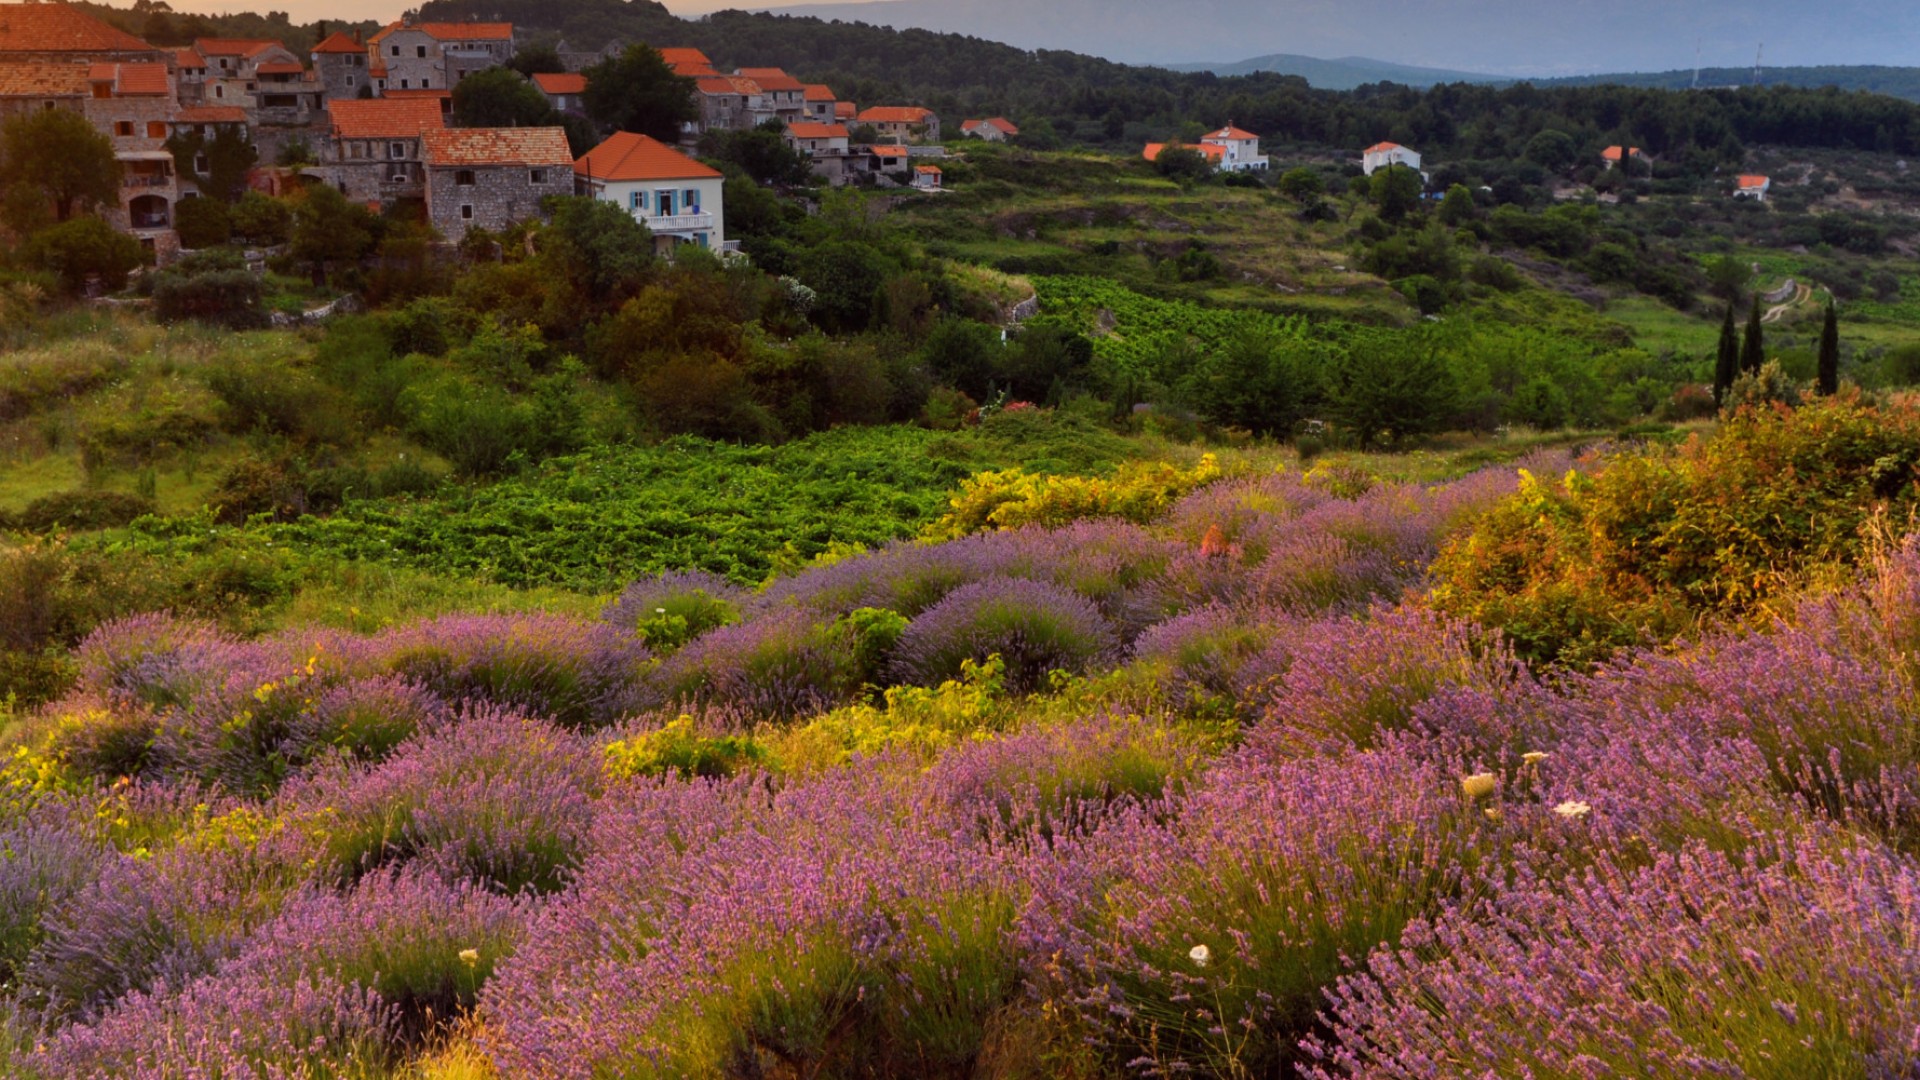 View of a lavender field with a few houses in the background in Croatia